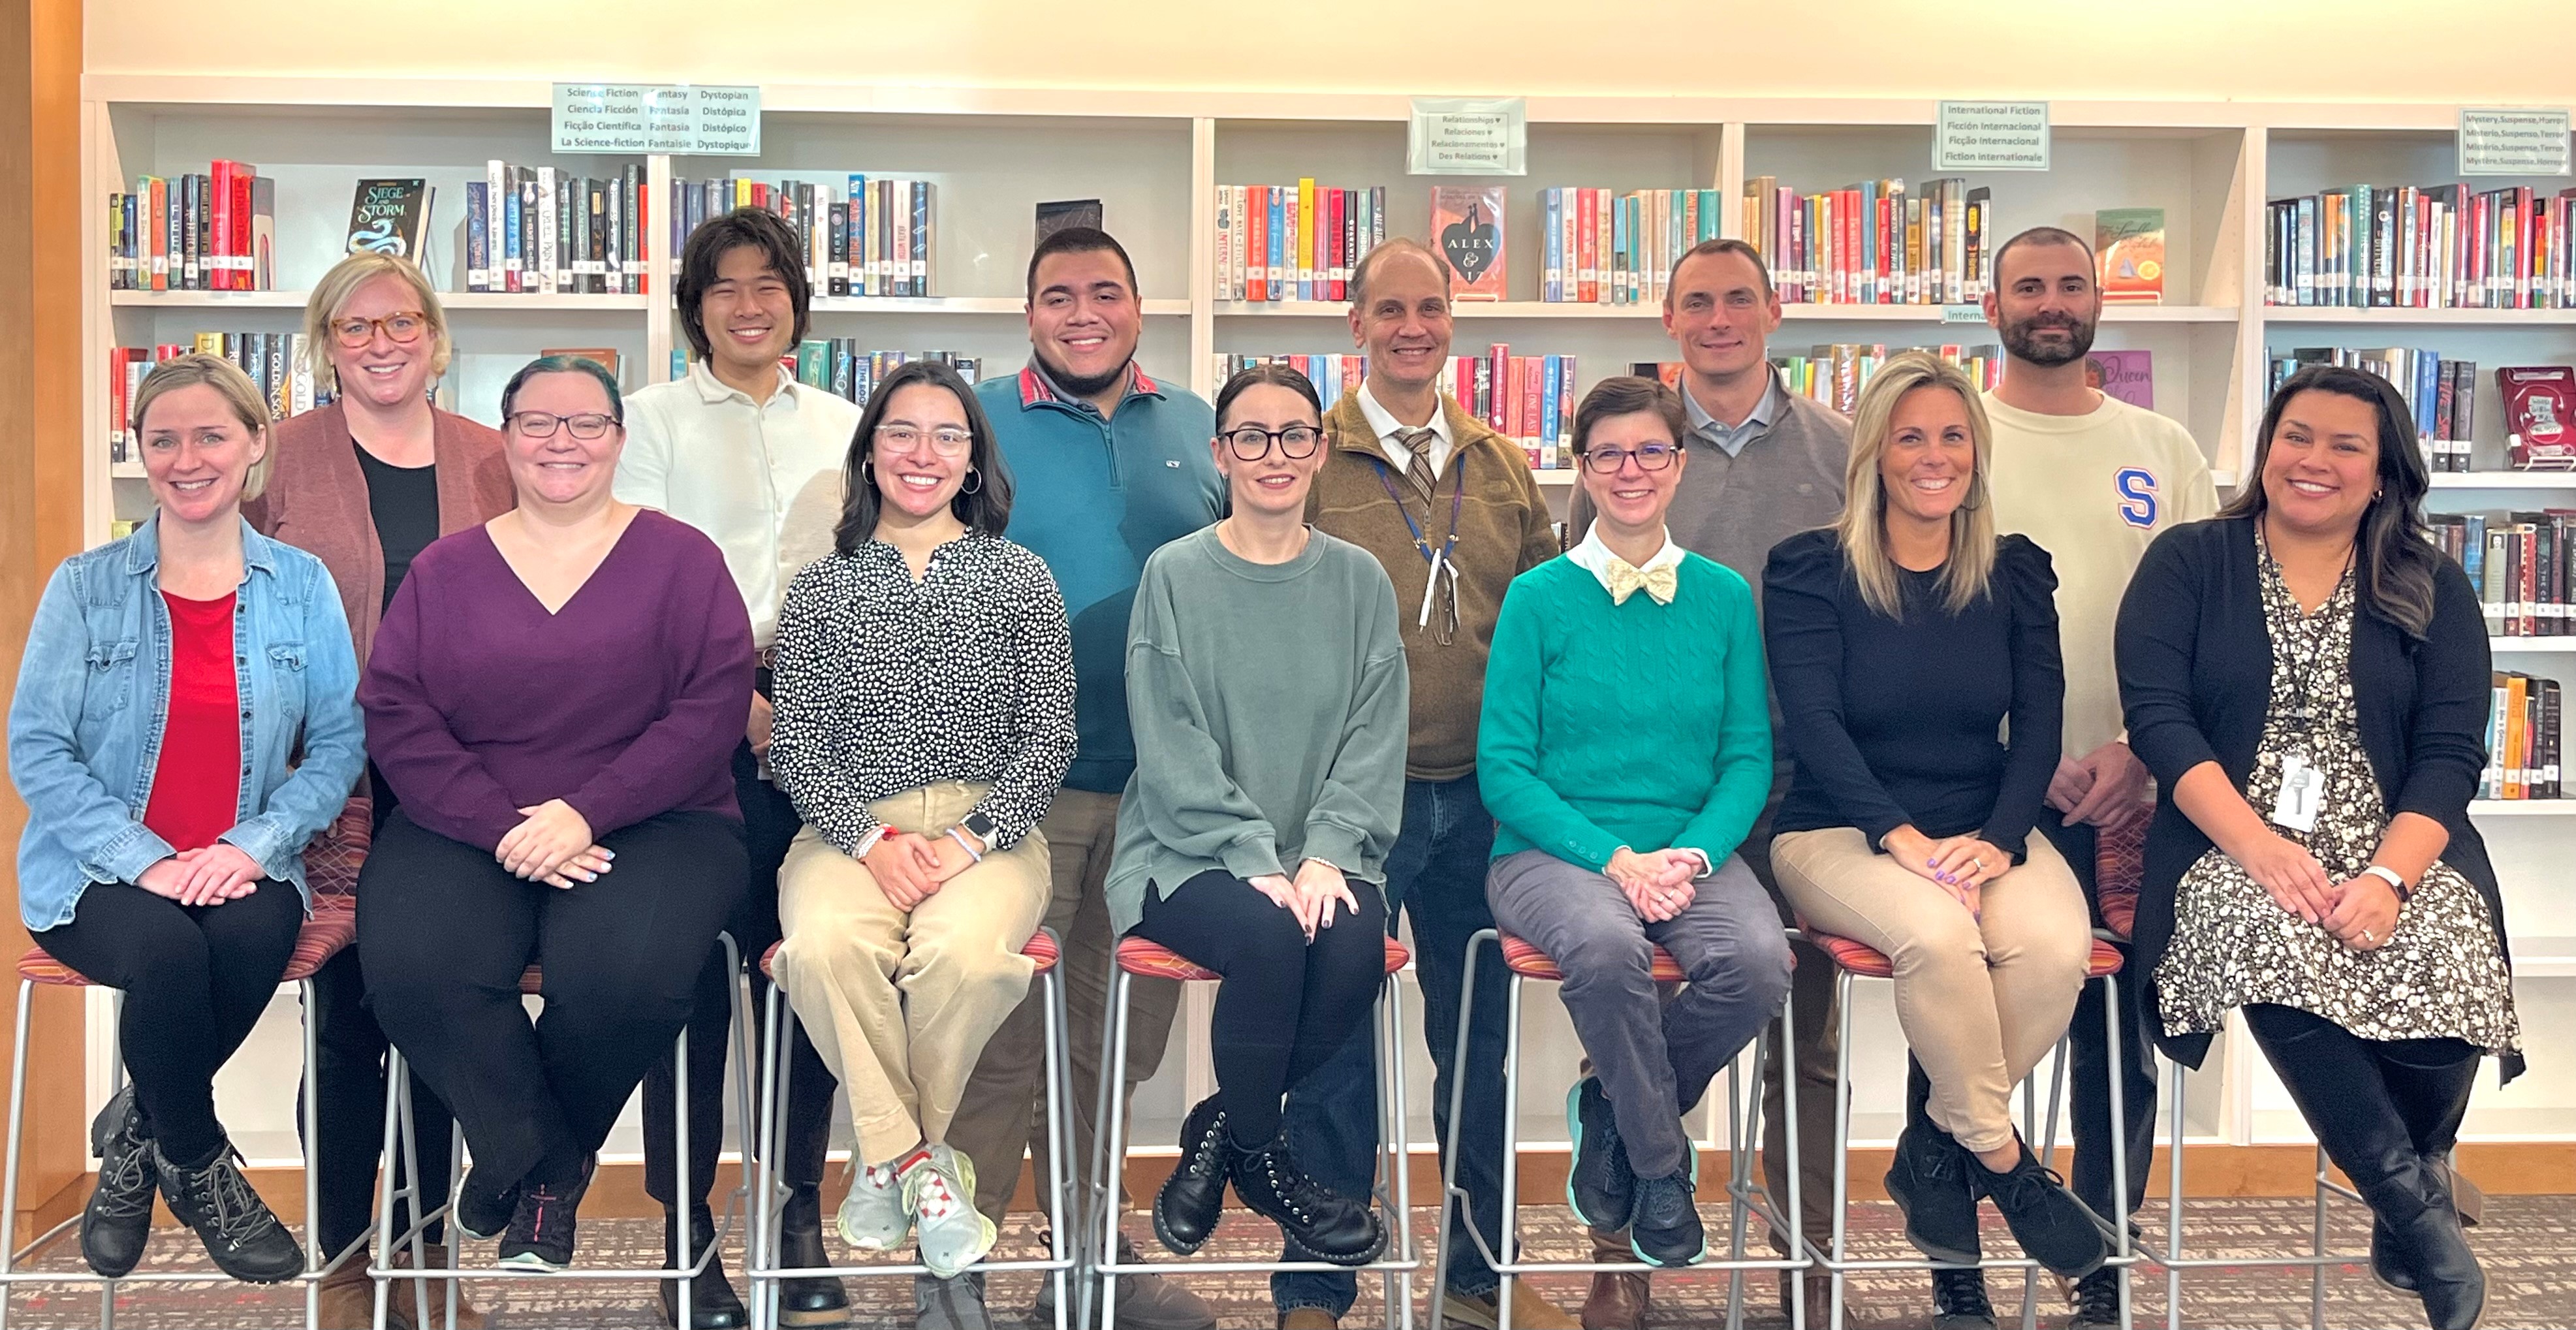 English Department Teachers  Top left to right:  Meagan Spinelli (Dept. Chair), Andrew Wang (11th grade), Christian Melgar (10th grade), Ken Olson (9th and 12th grade), Bert Stoker (11th grade), Matt Meservey (10th and 12th grade)   Bottom left to right: 